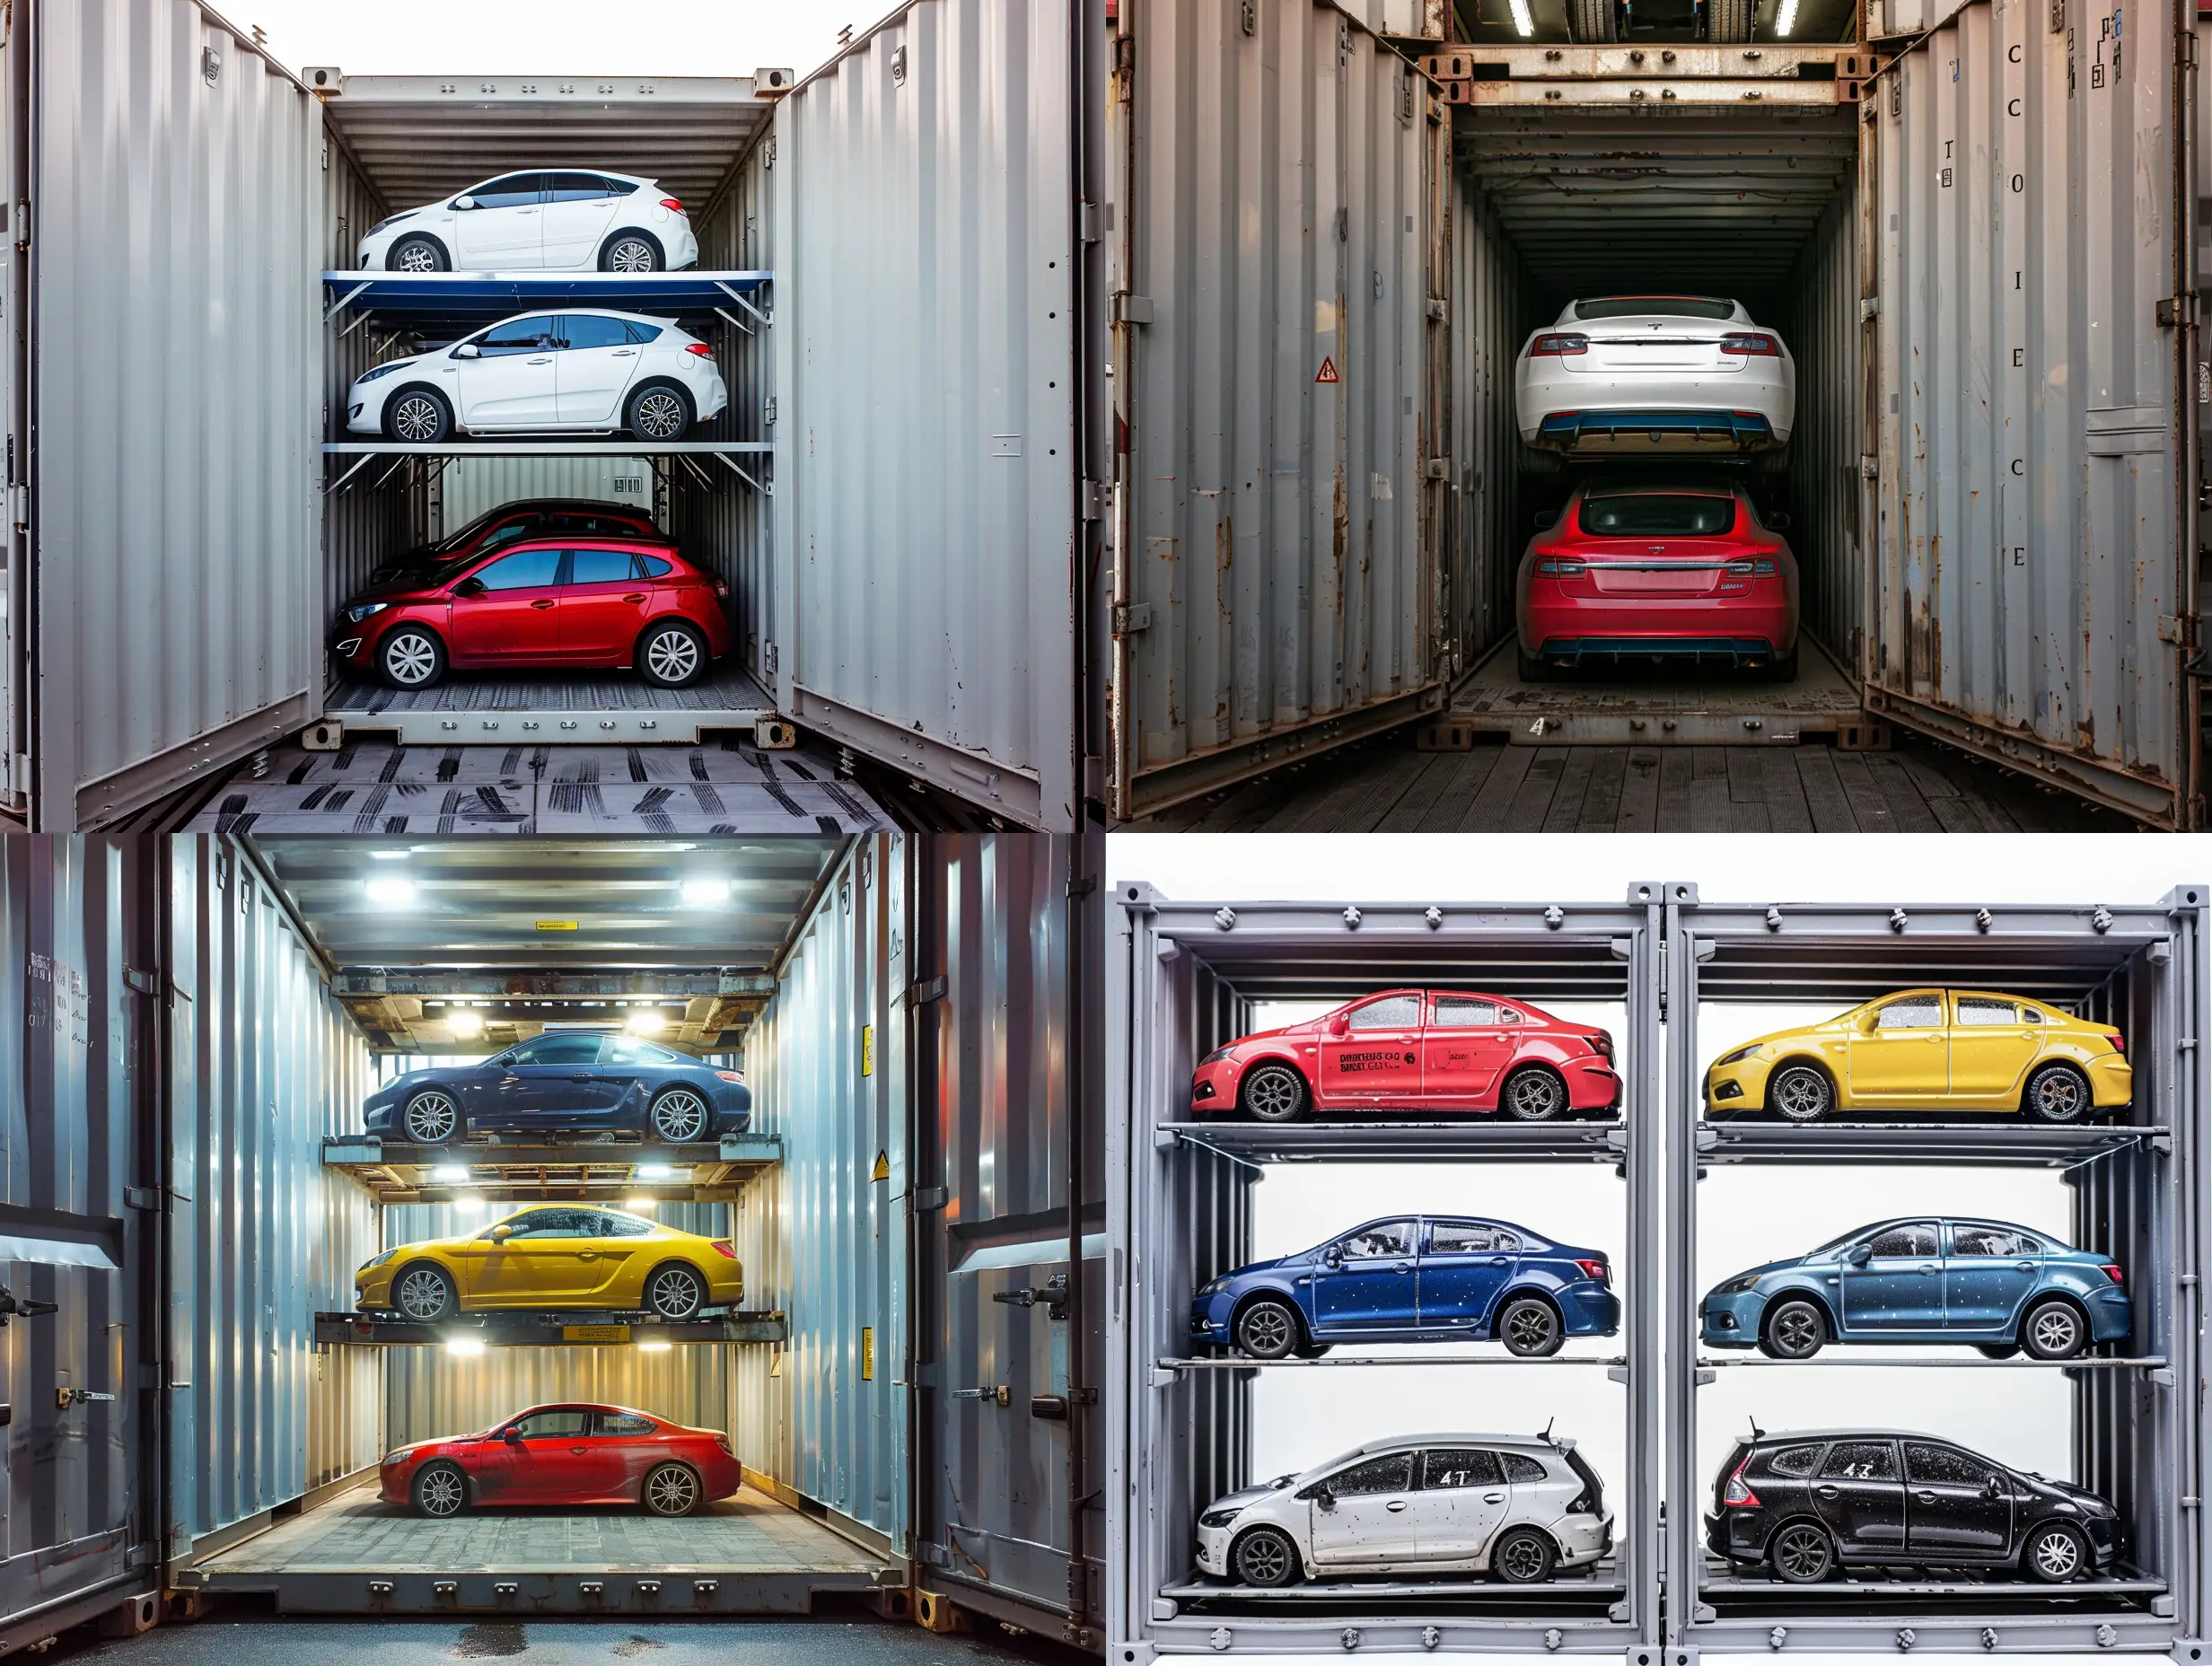 4 CARS LODED IN ONE CONTAINER EACH TWO ABOVE EACH OTHER 
